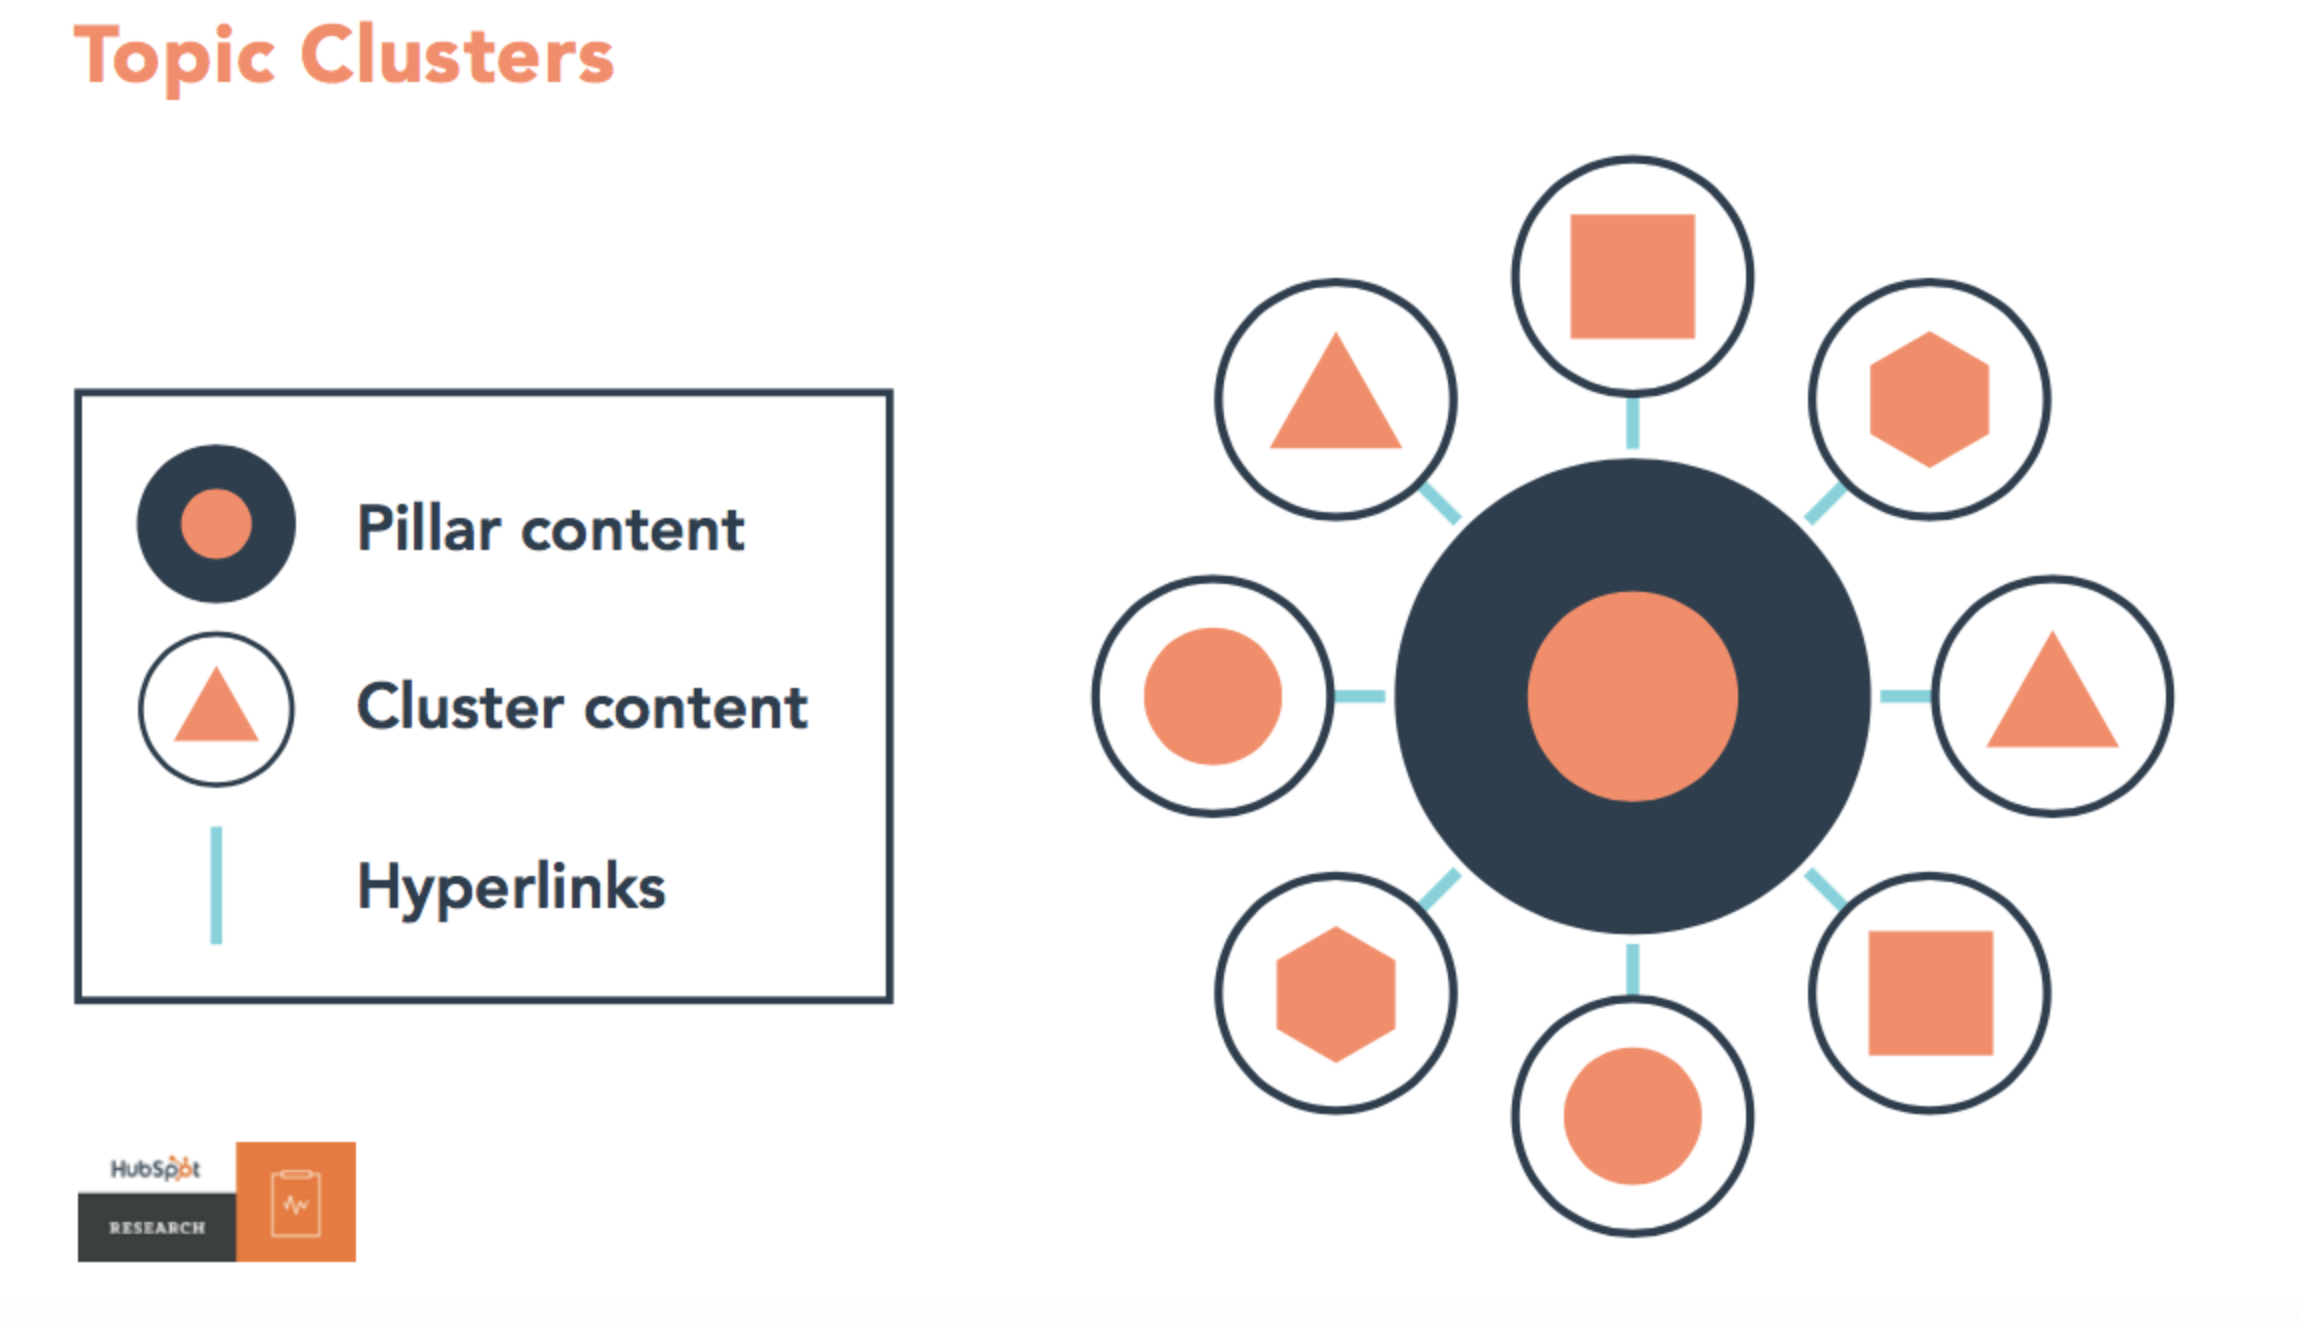 hubspot_topic_clusters